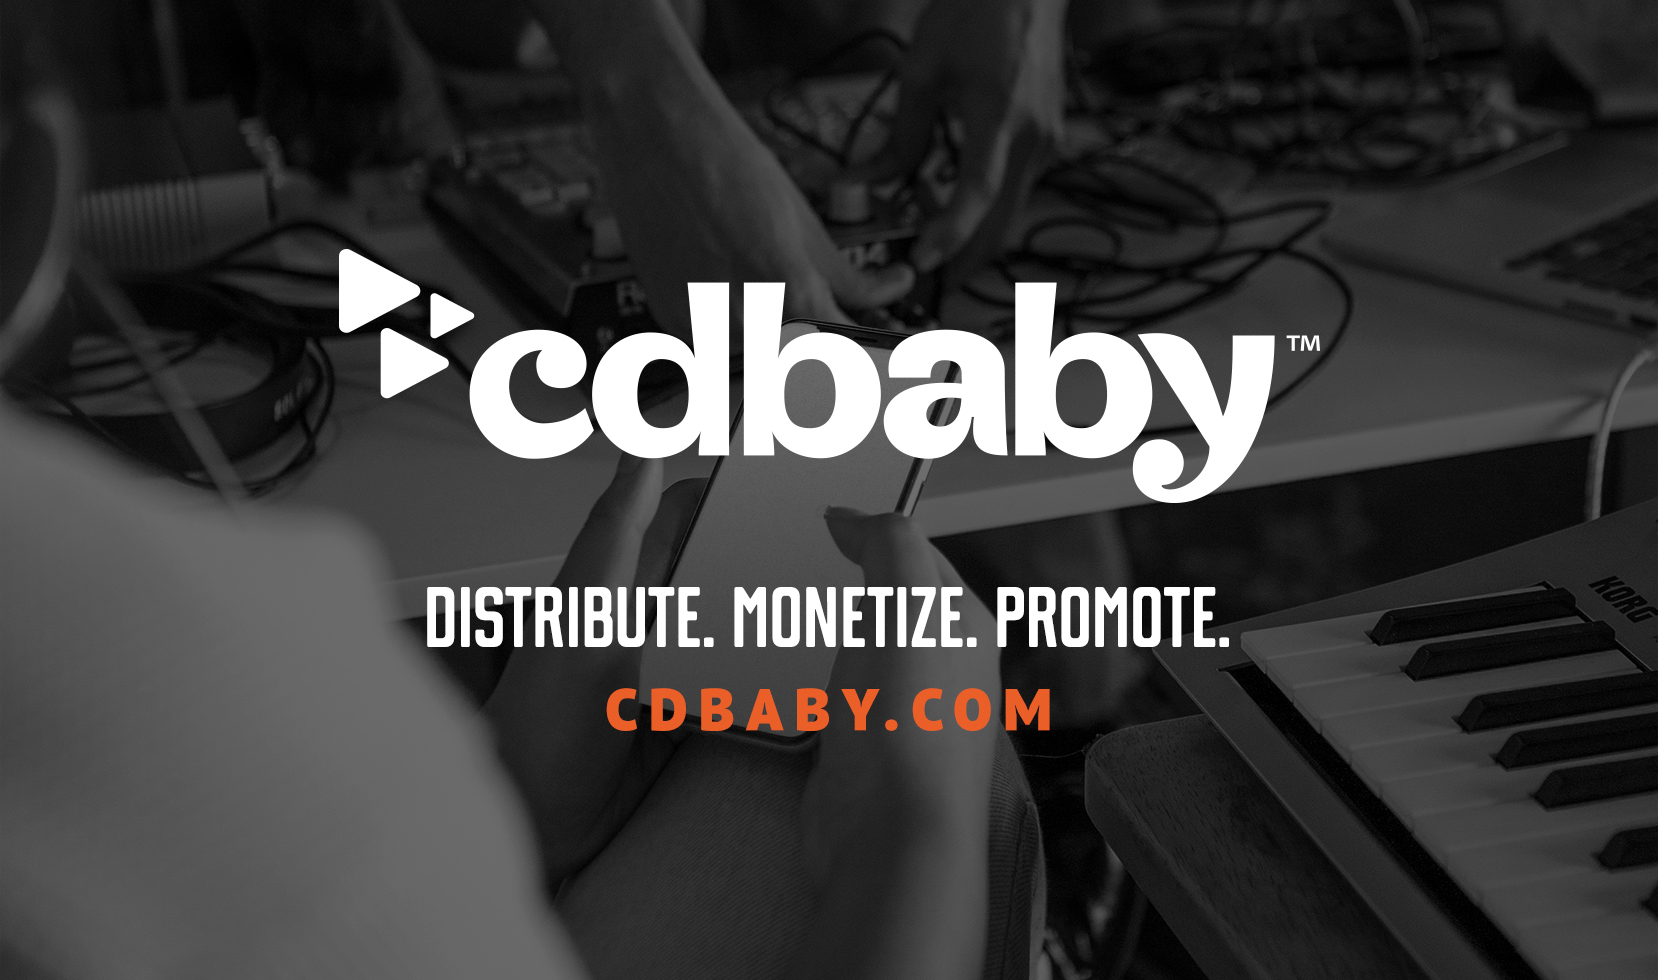 Exciting things ahead at CD Baby